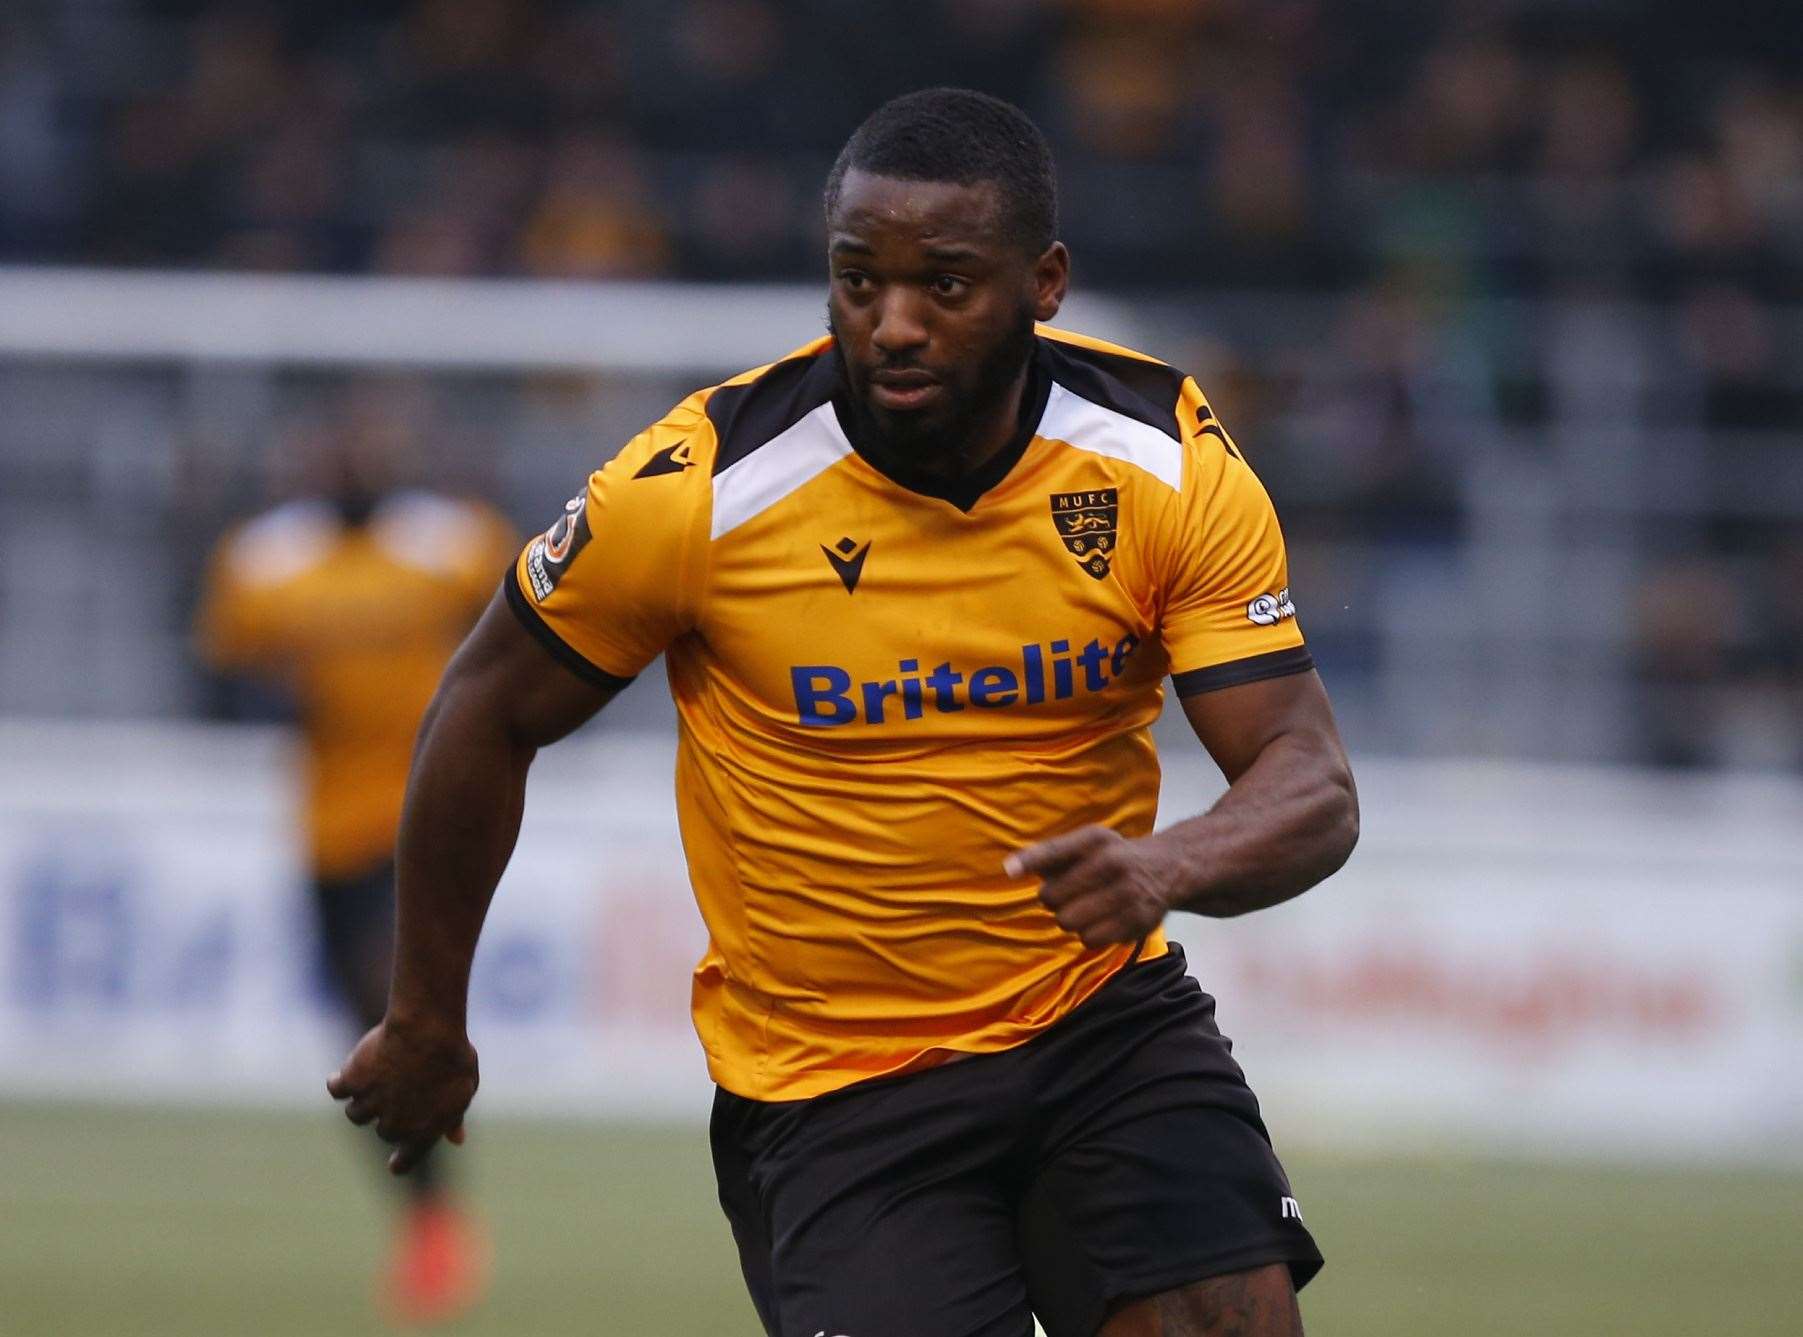 Ibby Akanbi's return to fitness is good news for Maidstone Picture: Andy Jones